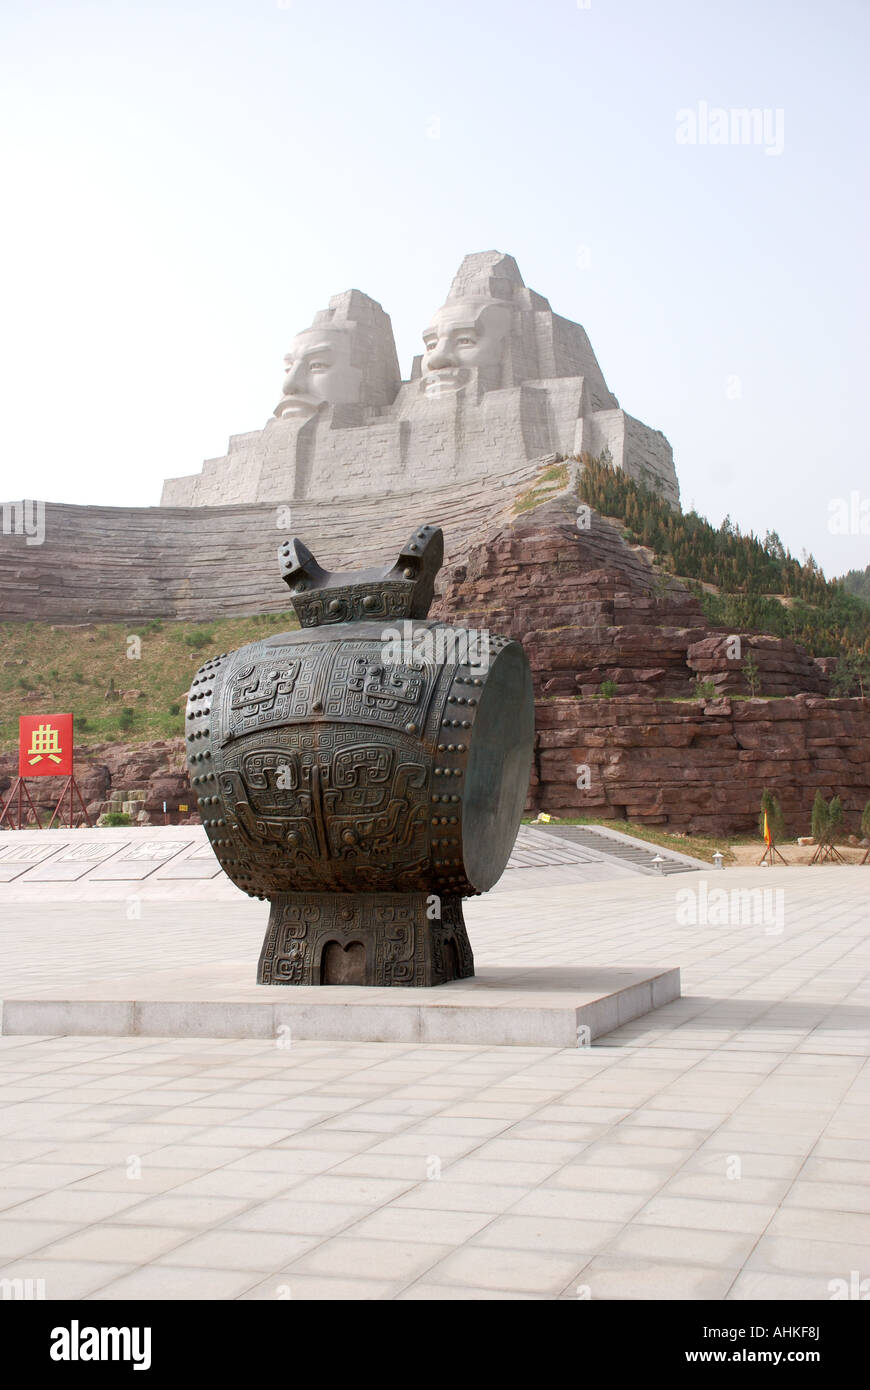 The bronze drum in front of the sstatues of emperors Yan Di and Huang Di at the Yellow River Scenic Area Henan Province Stock Photo